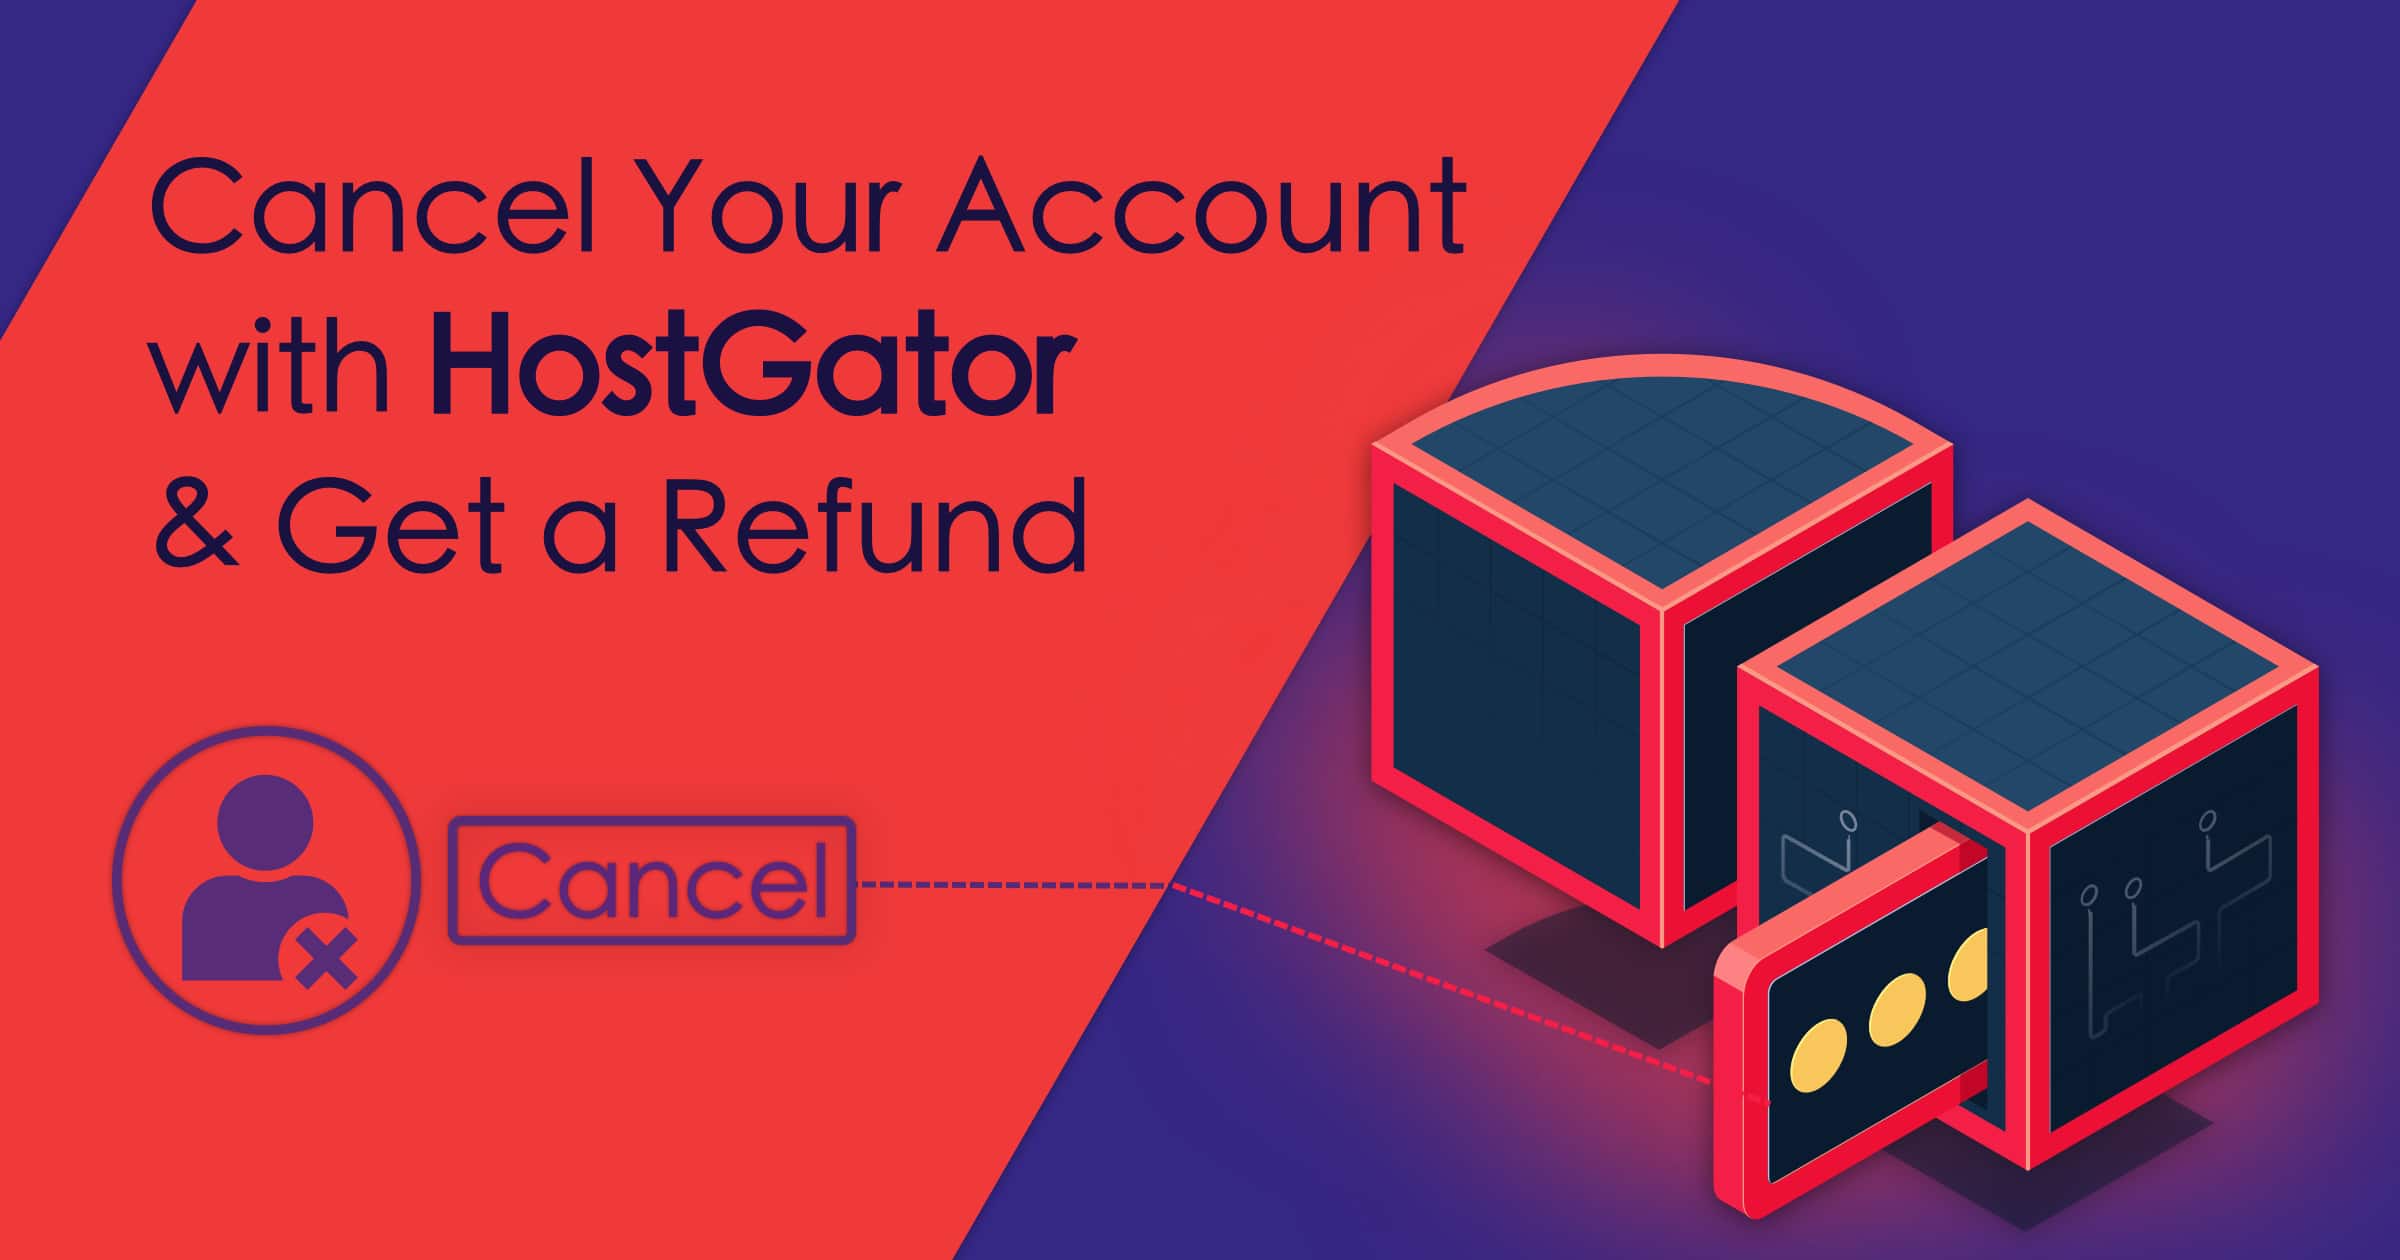 How To Cancel Your Account With Hostgator And Get A Refund Images, Photos, Reviews